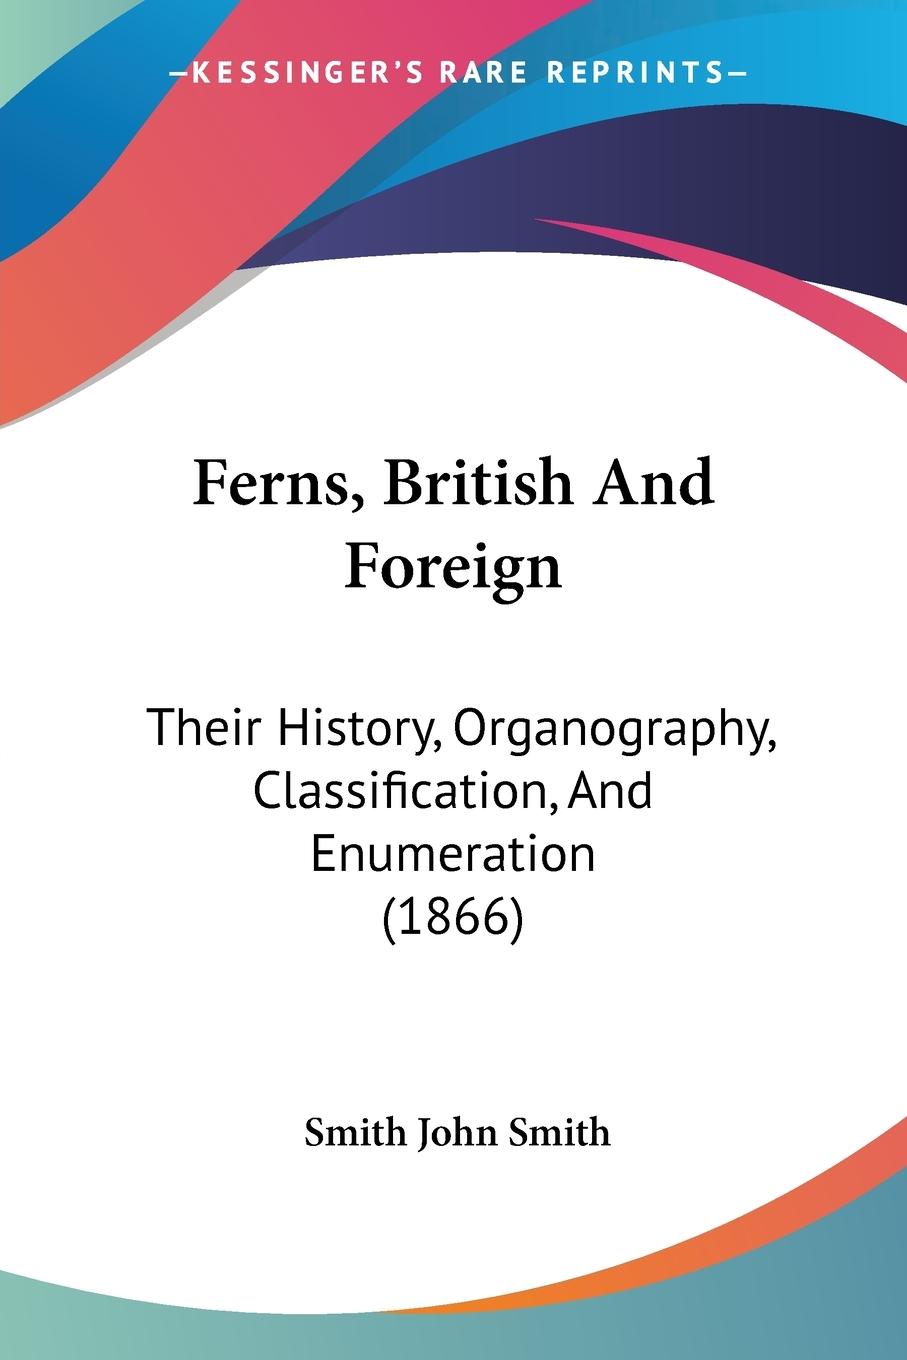 Ferns, British And Foreign - John Smith, Smith